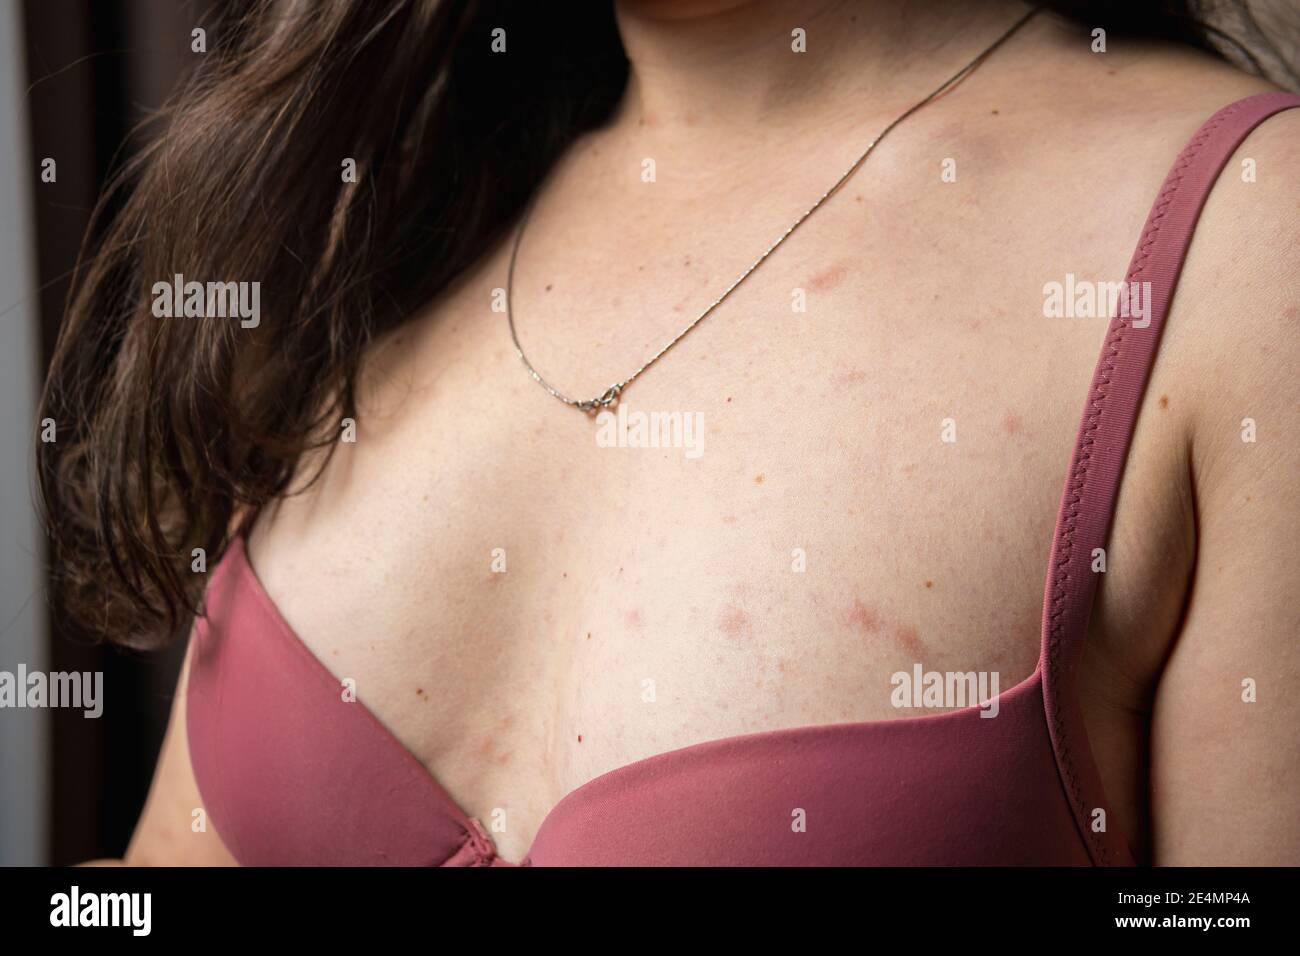 Women with symptoms of itchy urticaria or allergic reaction on the